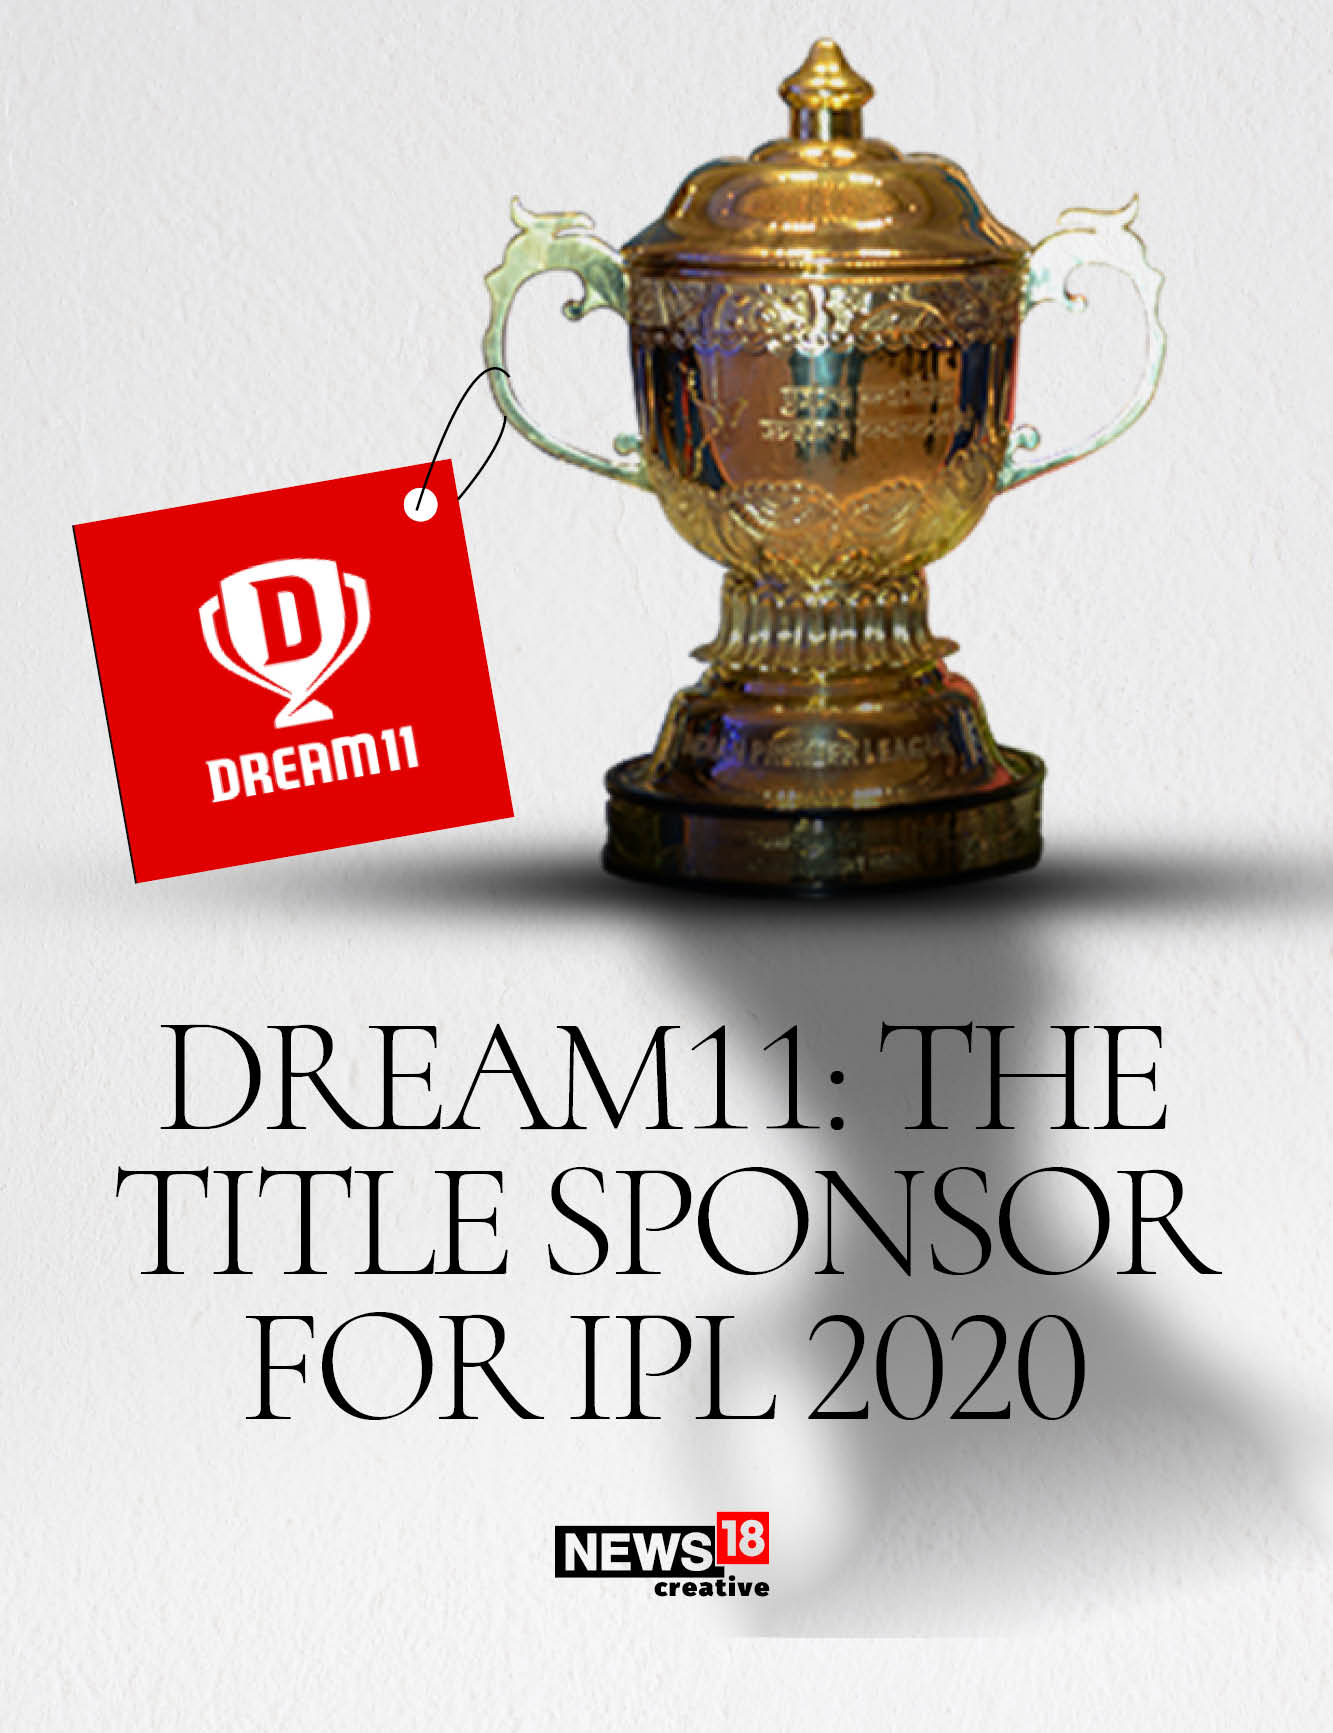 Dream11's journey to the big league